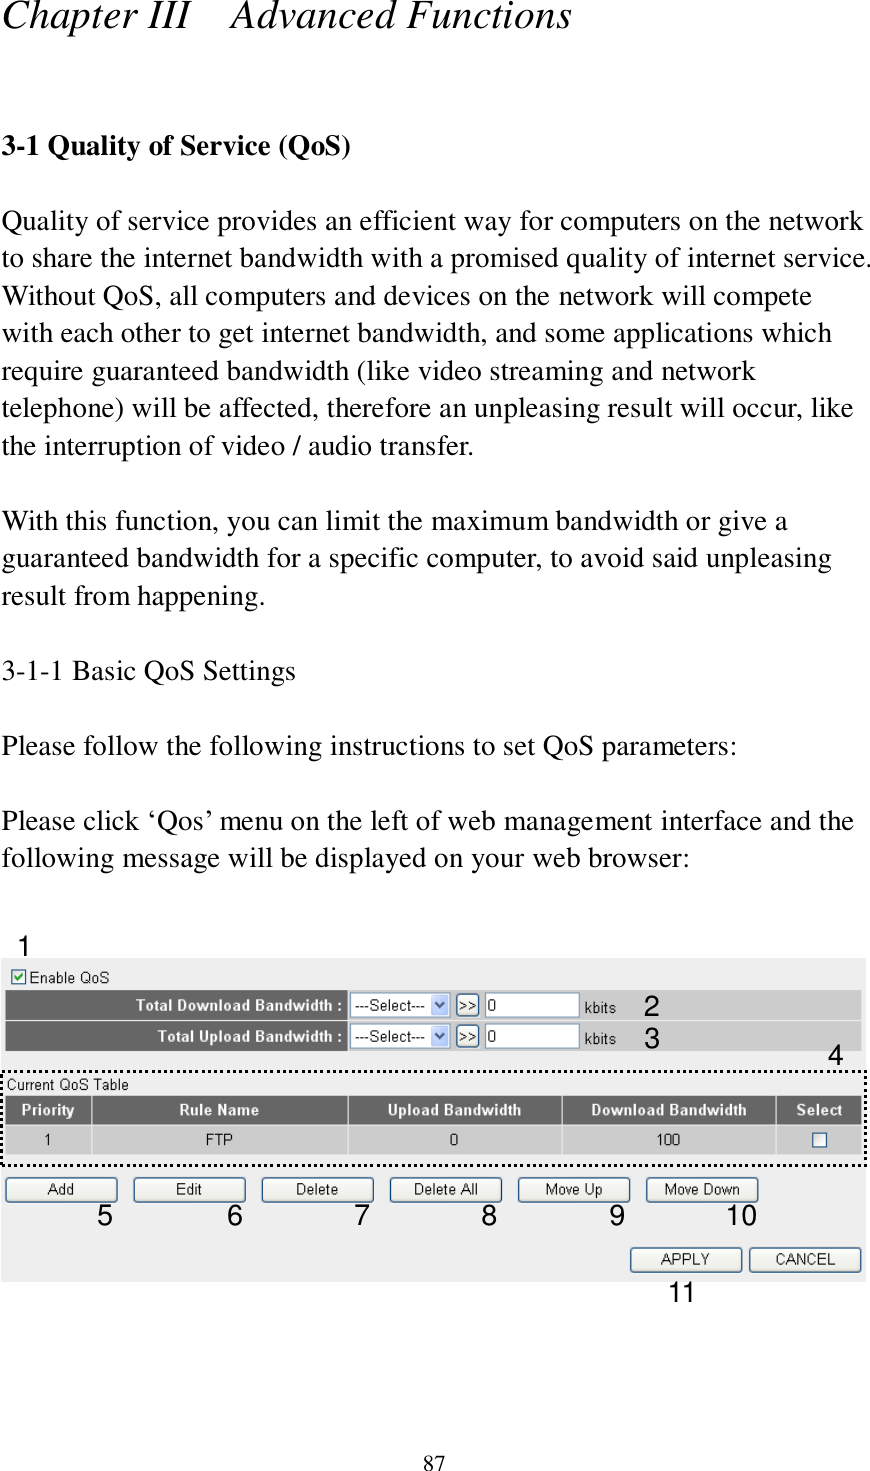 87 Chapter III    Advanced Functions  3-1 Quality of Service (QoS)  Quality of service provides an efficient way for computers on the network to share the internet bandwidth with a promised quality of internet service. Without QoS, all computers and devices on the network will compete with each other to get internet bandwidth, and some applications which require guaranteed bandwidth (like video streaming and network telephone) will be affected, therefore an unpleasing result will occur, like the interruption of video / audio transfer.    With this function, you can limit the maximum bandwidth or give a guaranteed bandwidth for a specific computer, to avoid said unpleasing result from happening.  3-1-1 Basic QoS Settings  Please follow the following instructions to set QoS parameters:  Please click „Qos‟ menu on the left of web management interface and the following message will be displayed on your web browser:       1 2 3 4 5 6 7 8 9 10 11 